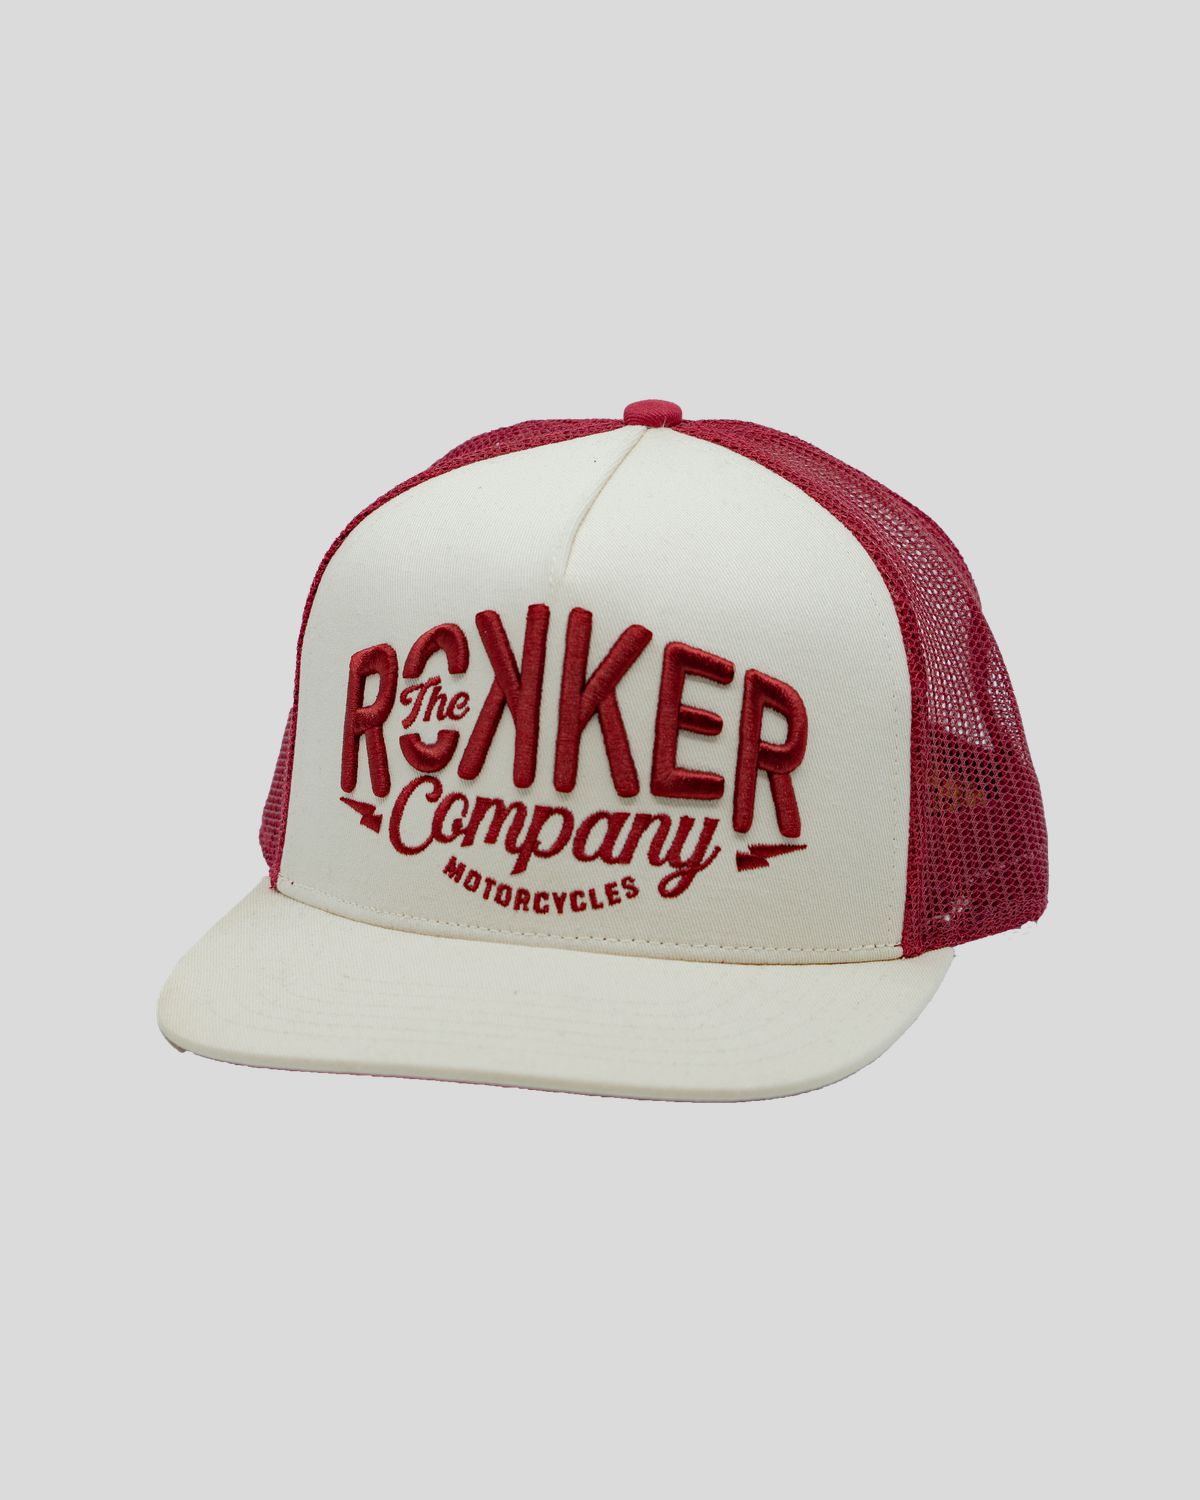 Motorcycles & CO Snapback Red/White